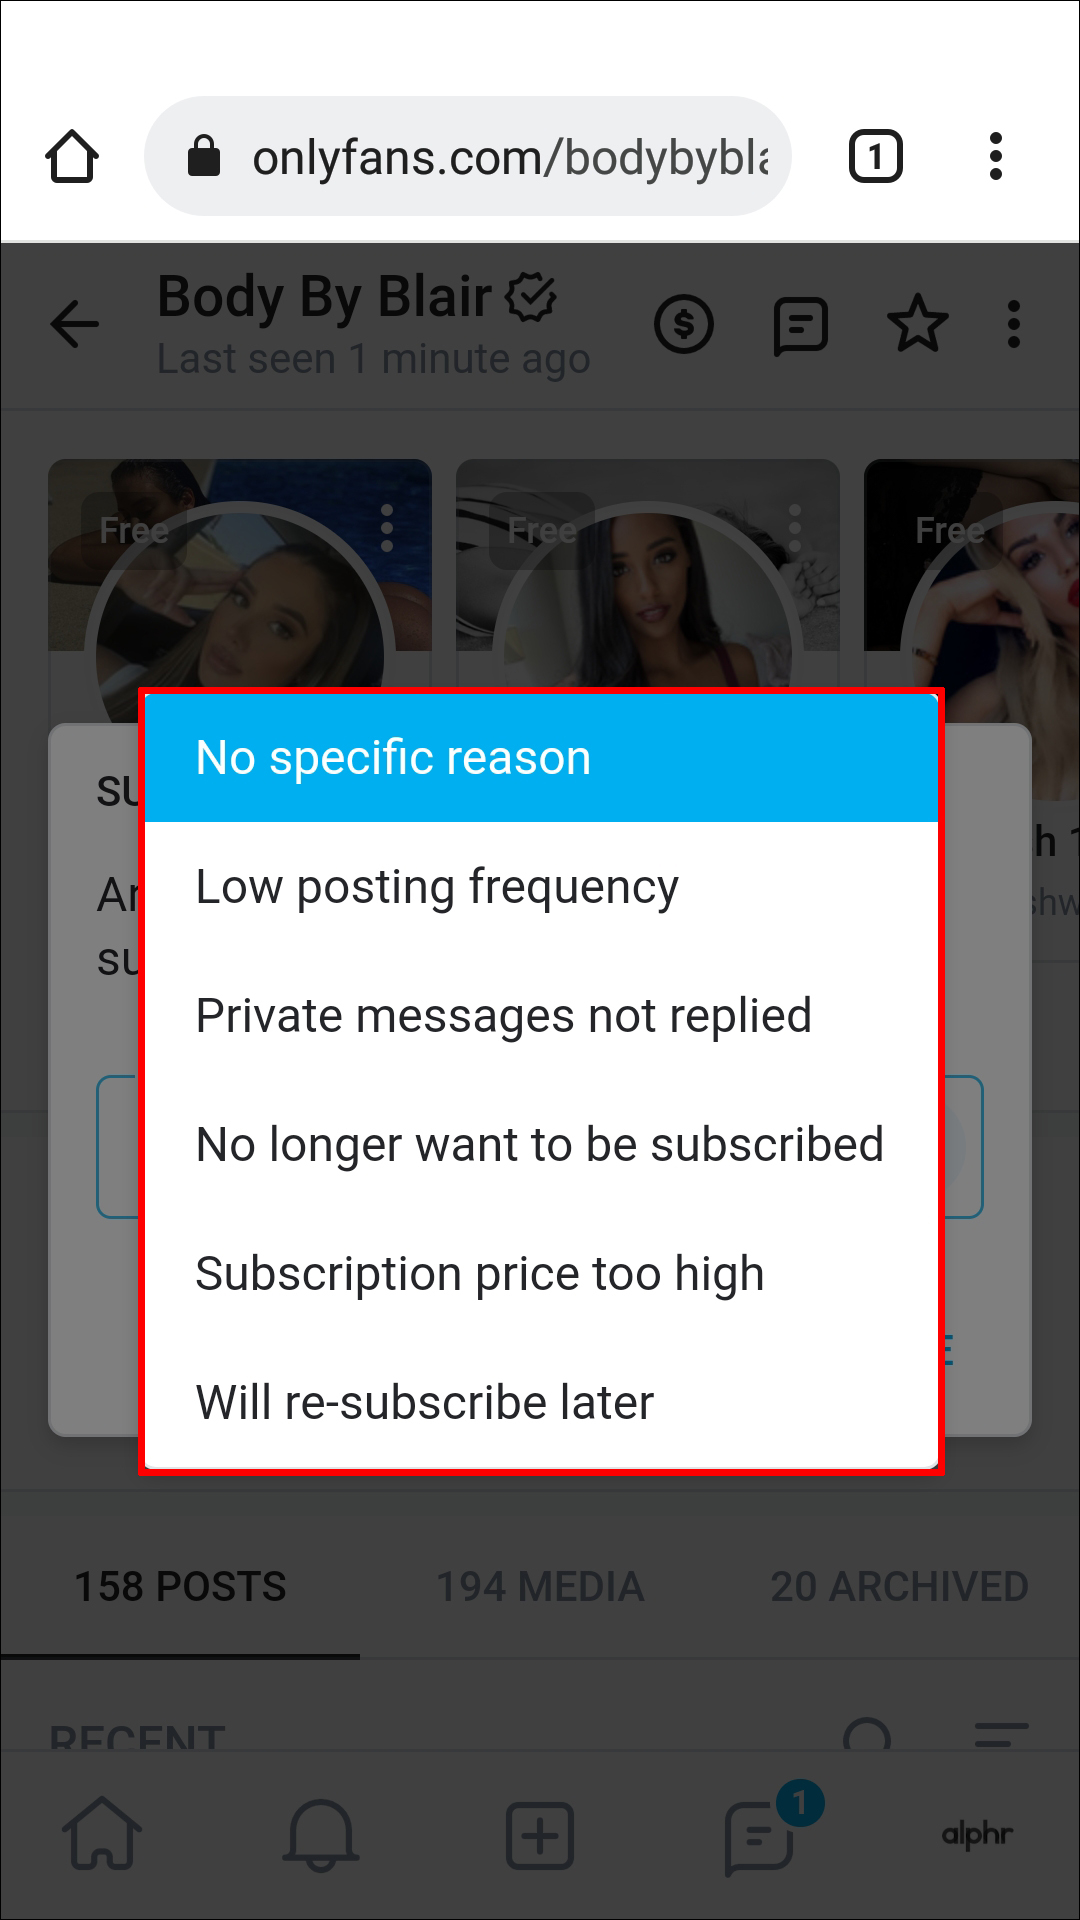 How to unsubscribe from only fans